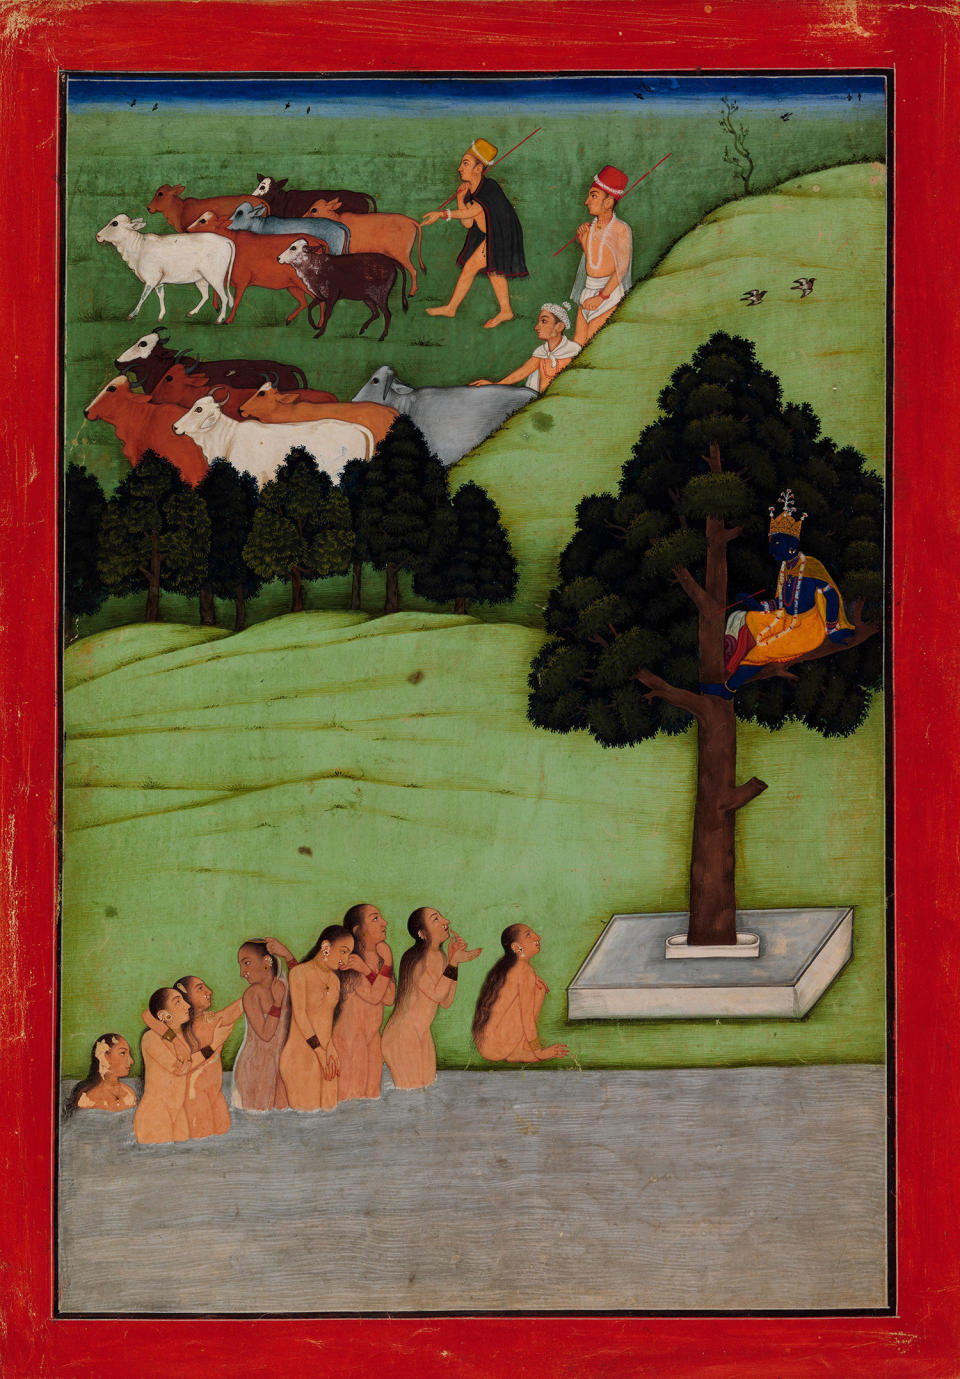 "Krishna Steals the Clothing of the Gopis (Cow&nbsp;Maidens)."&nbsp;Attributed to the artist known as the Early Master at&nbsp;the Court of Mandi.&nbsp;Probably an illustrated folio from a dispersed&nbsp;Bhagavata Purana (The Ancient Story of God)&nbsp;Punjab Hills, kingdom of Mandi, ca. 1640.&nbsp;Opaque watercolor and gold on paper; red border with&nbsp;white and black inner rules; painting 11 7/8 x 8 in.&nbsp;Promised Gift of the Kronos Collections, 2015.